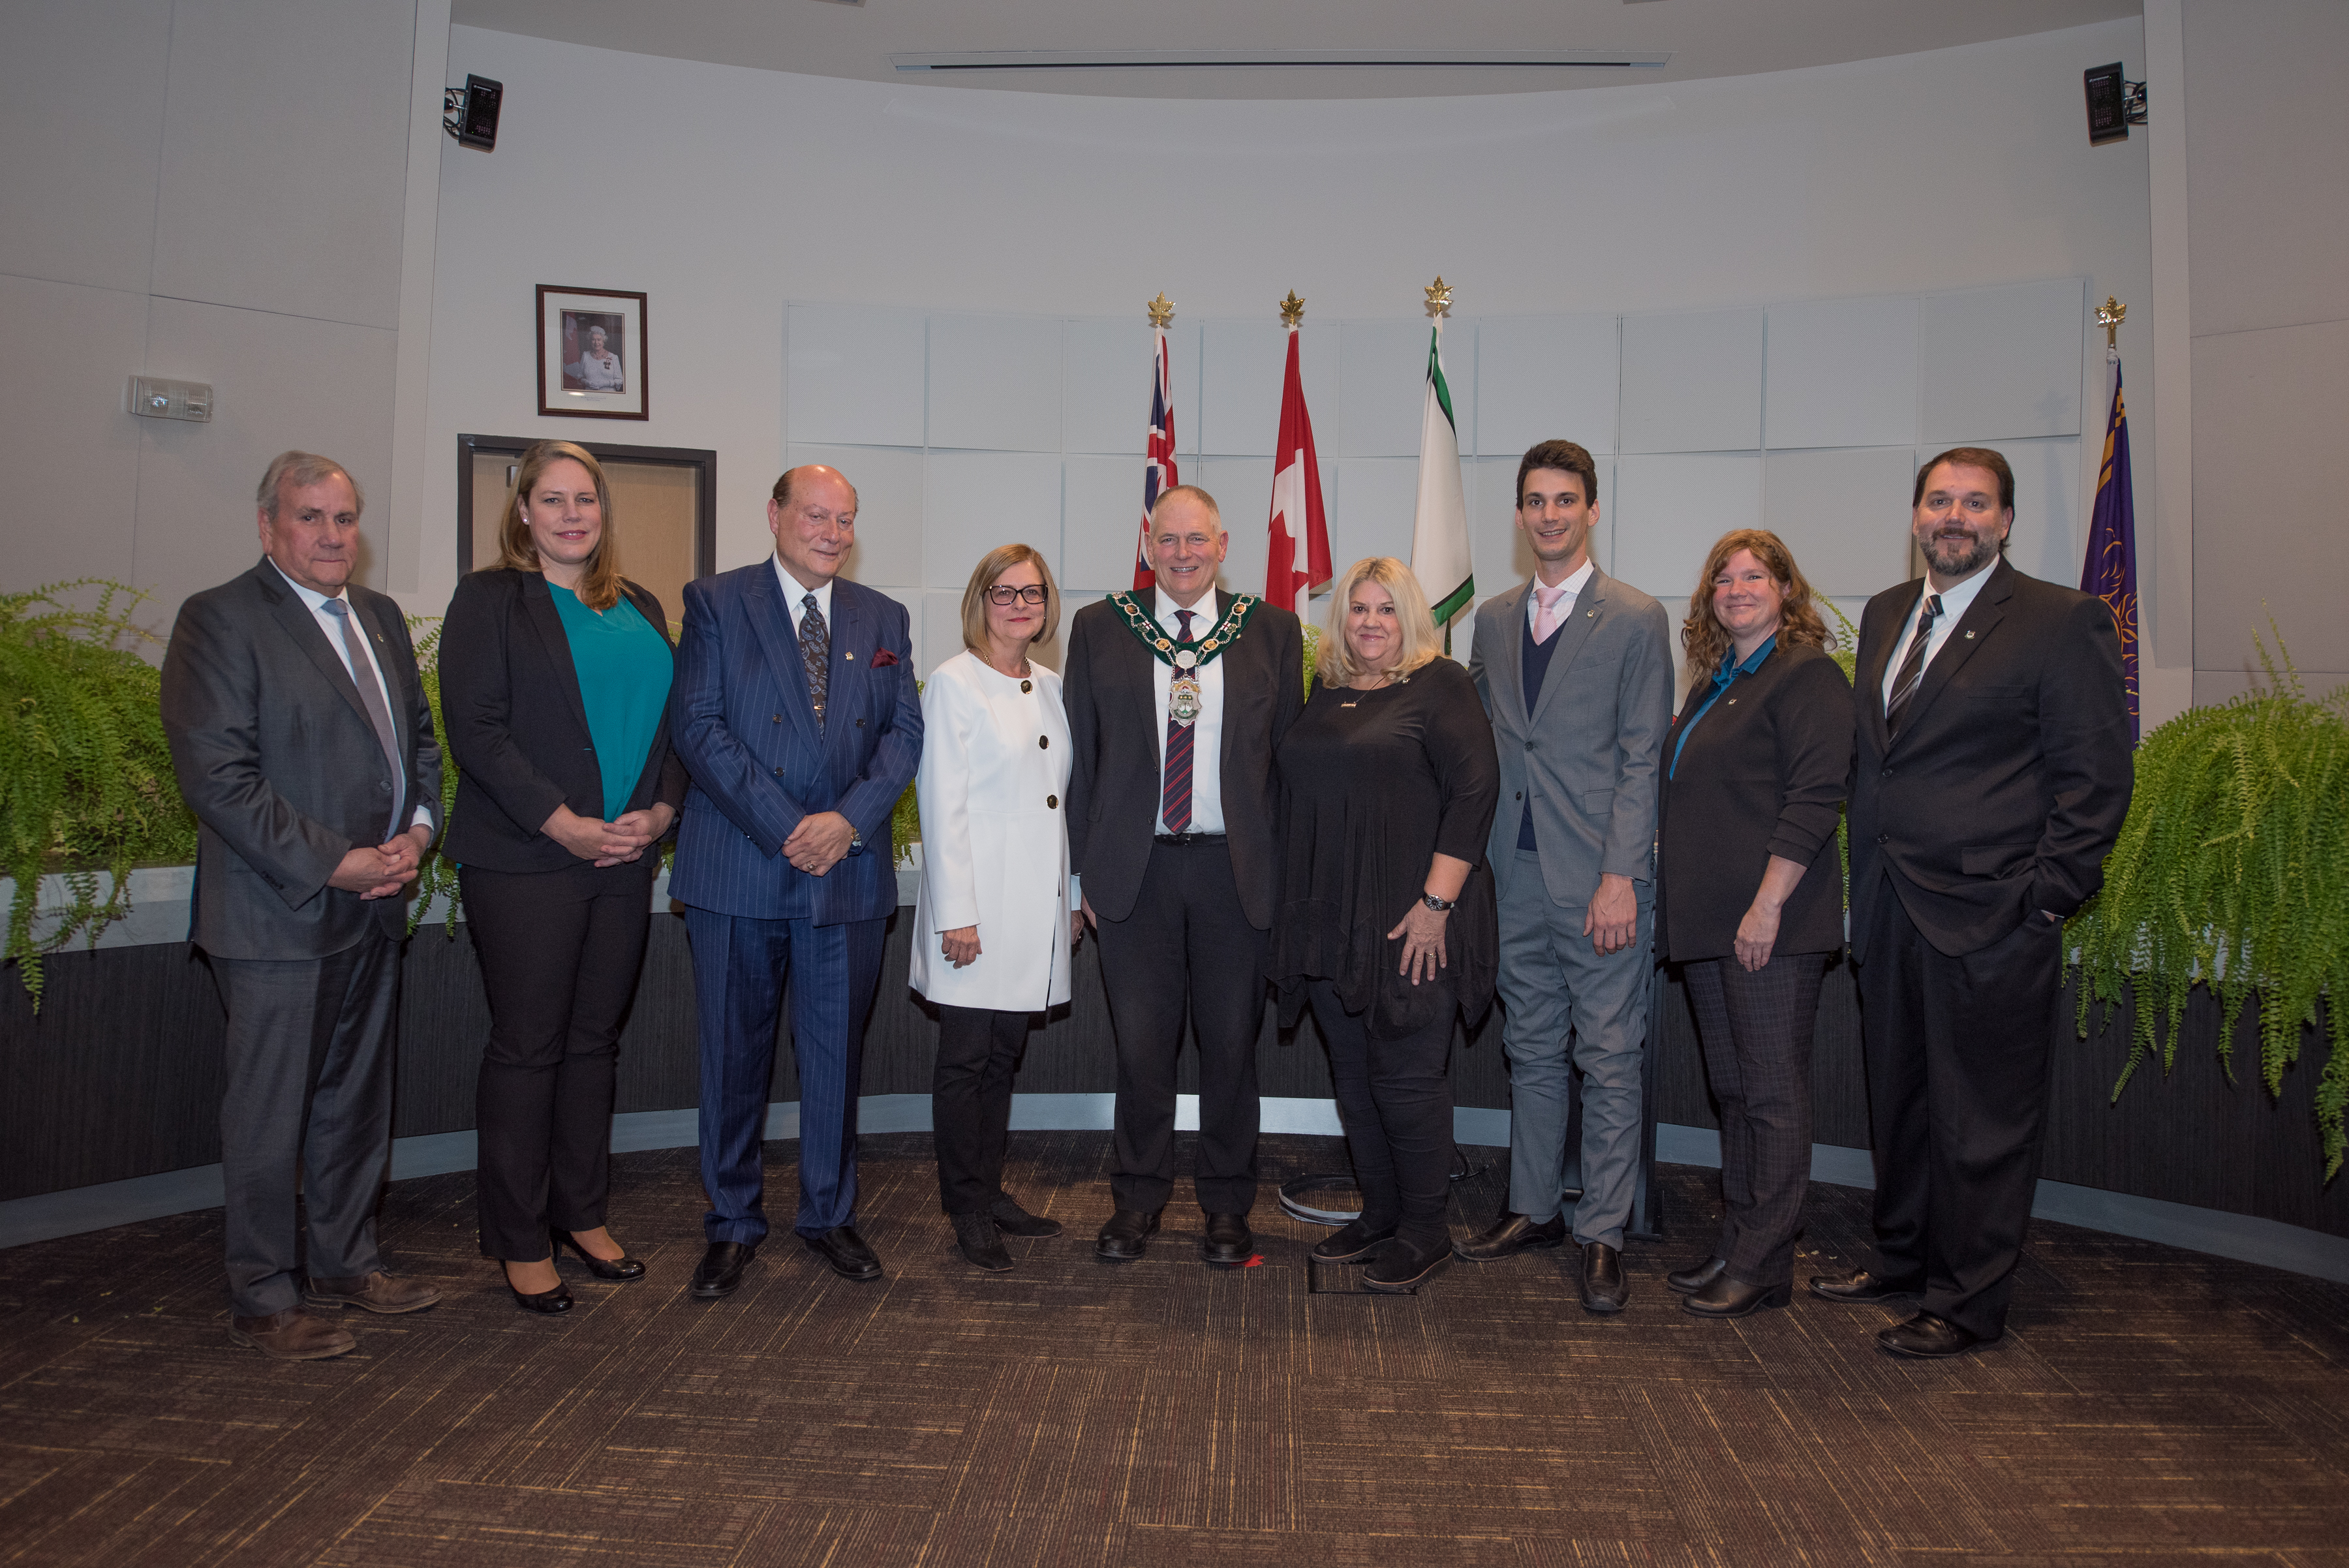 A picture of the 2022-2026 council members, including the Mayor and 8 Ward Councillors.